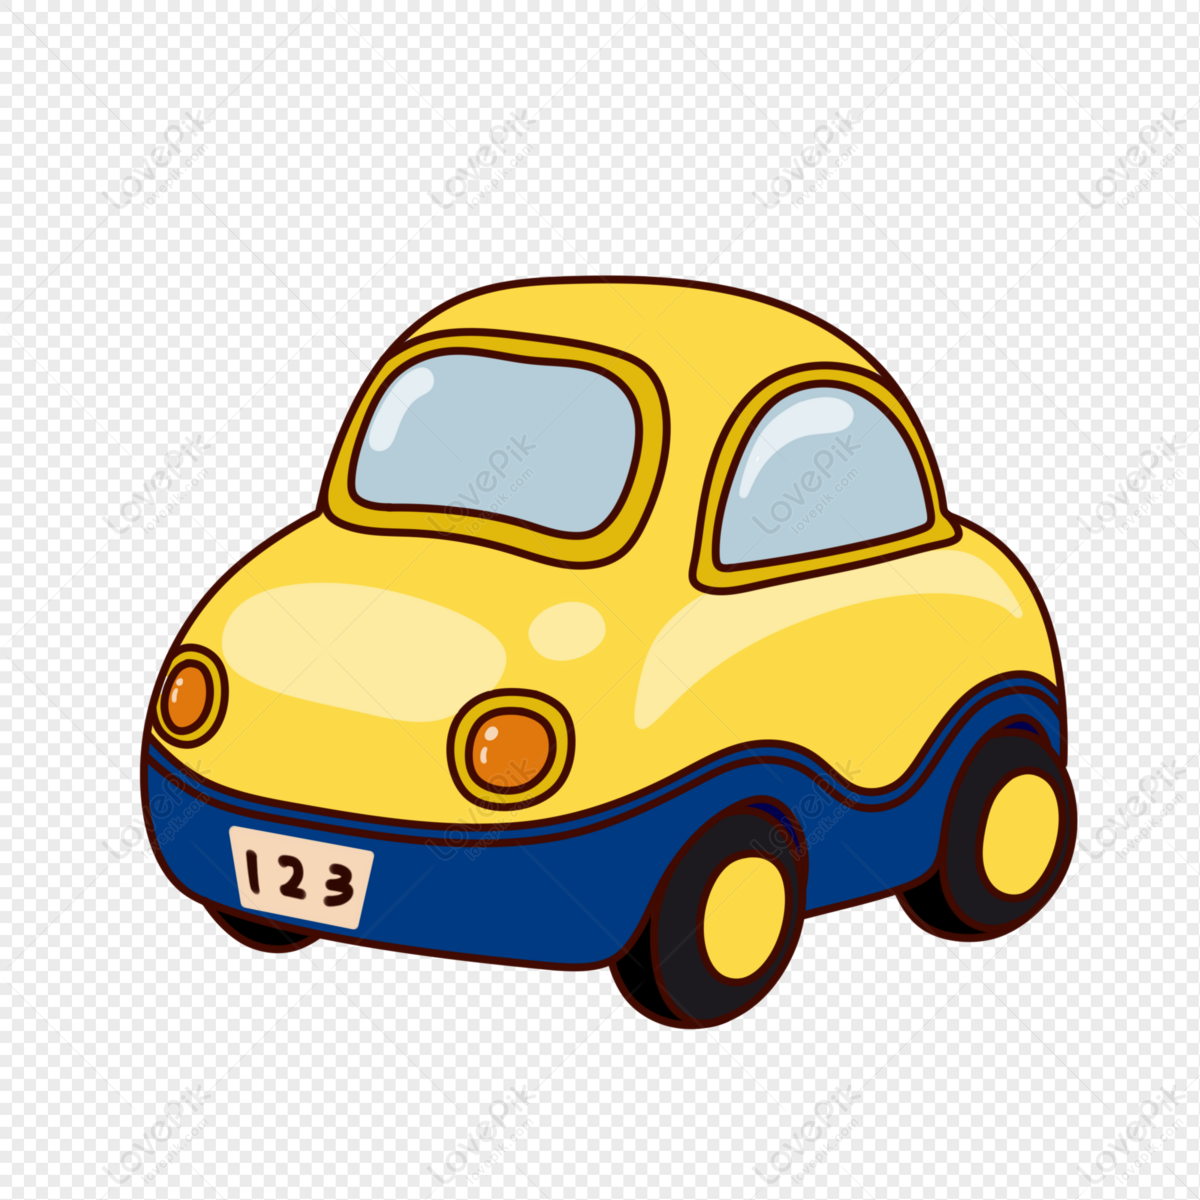 Cartoon Toy Car PNG Image Free Download And Clipart Image For Free Download  - Lovepik | 401098931